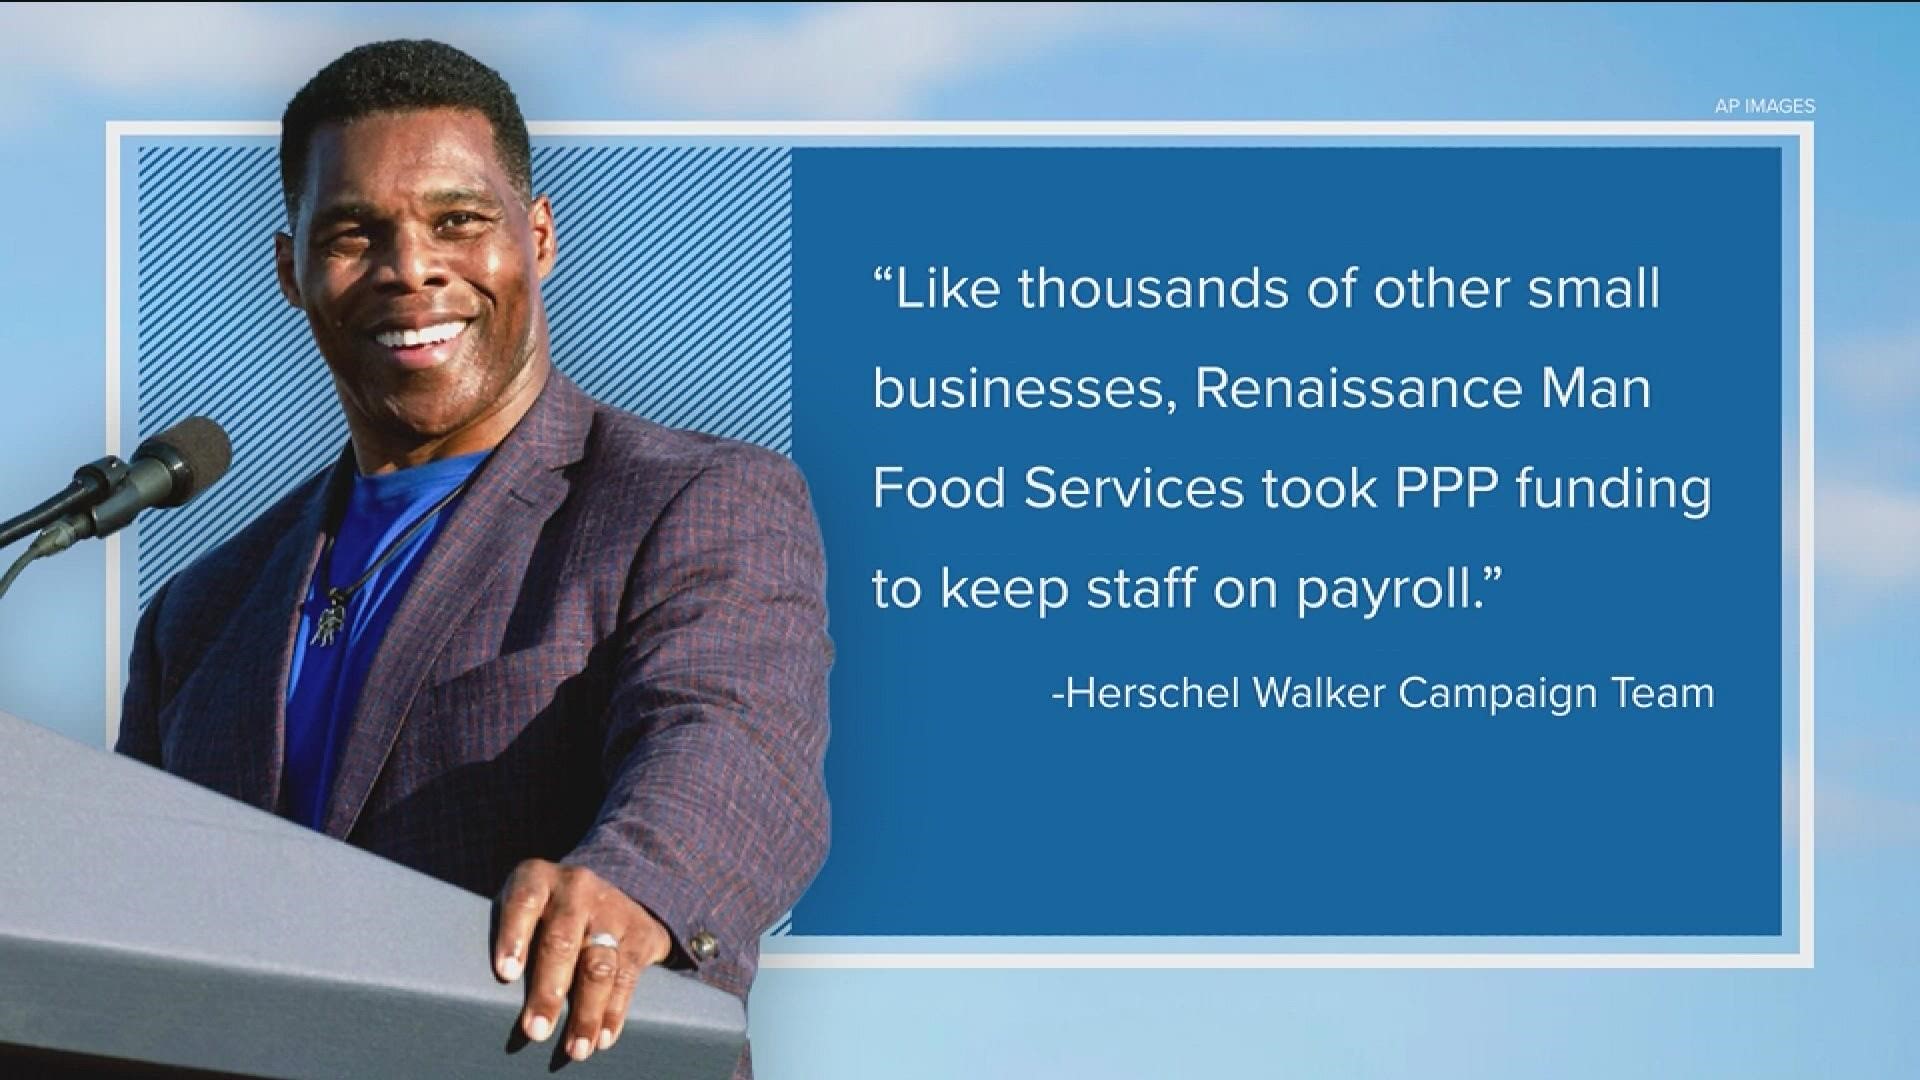 U.S. Senate candidate Herschel Walker had business interests that took government bailout money during the early stages of the pandemic, records show.